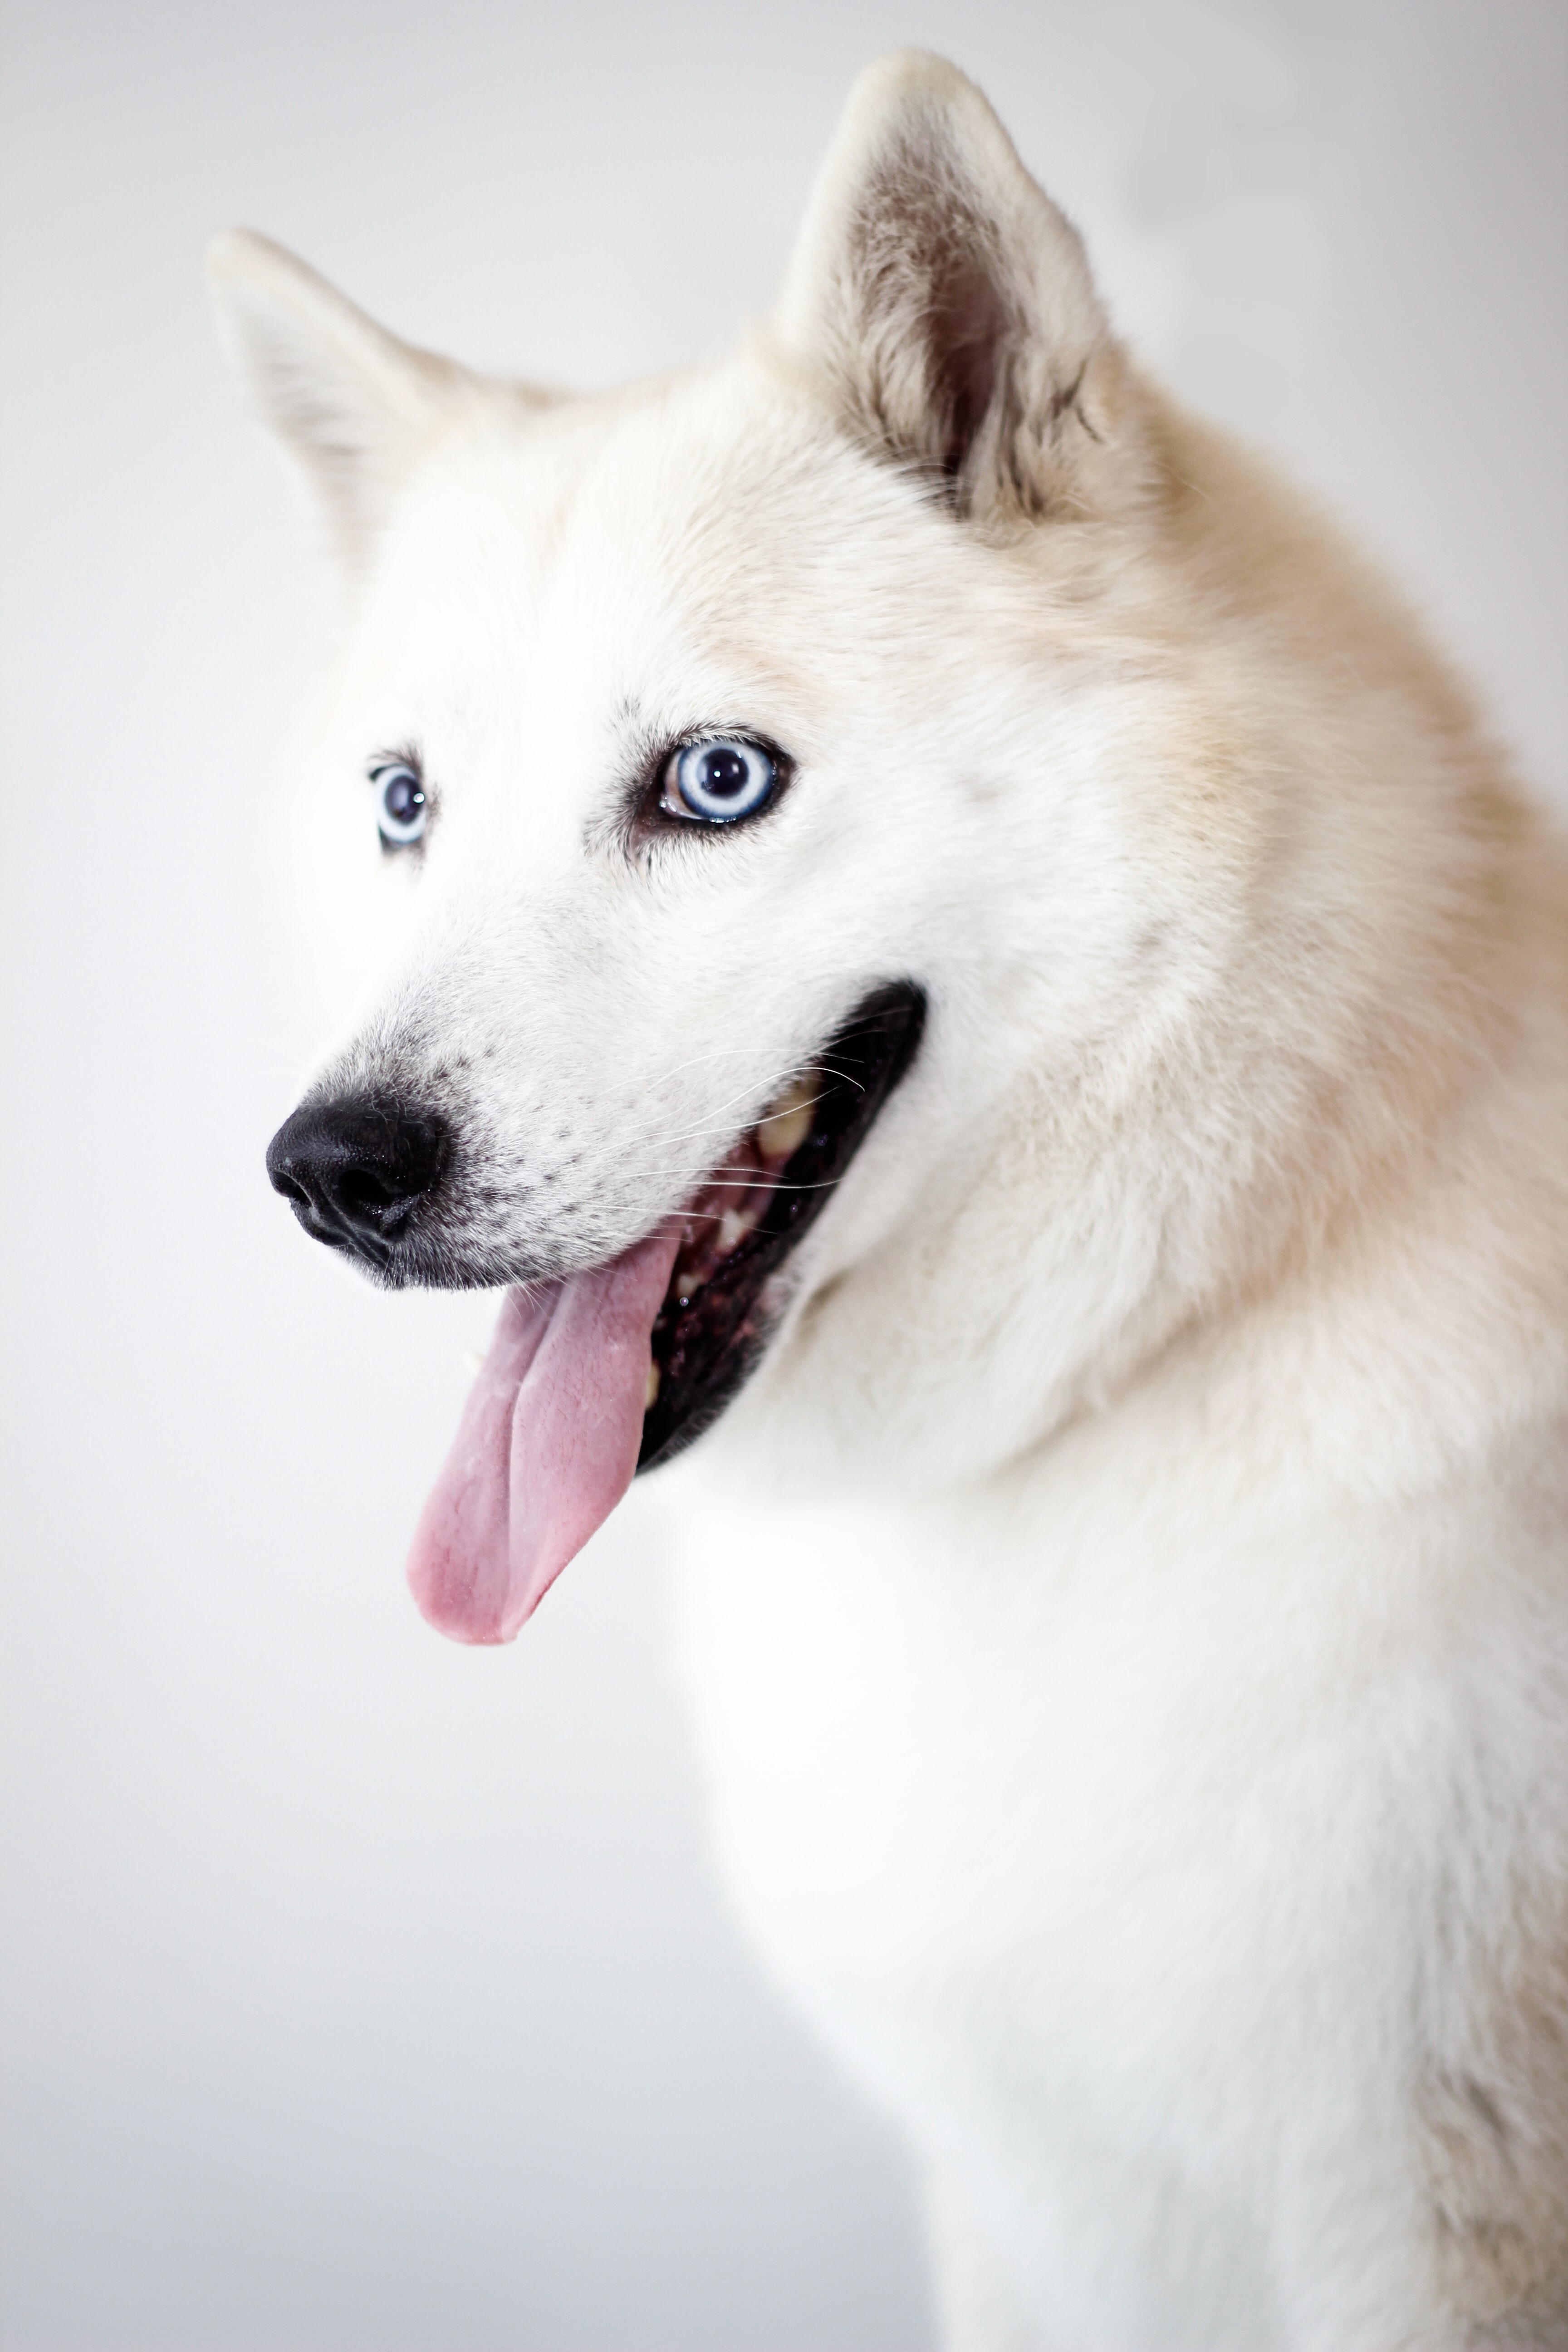 tongue stuck out, husky, animals, white, dog, protruding tongue mobile wallpaper